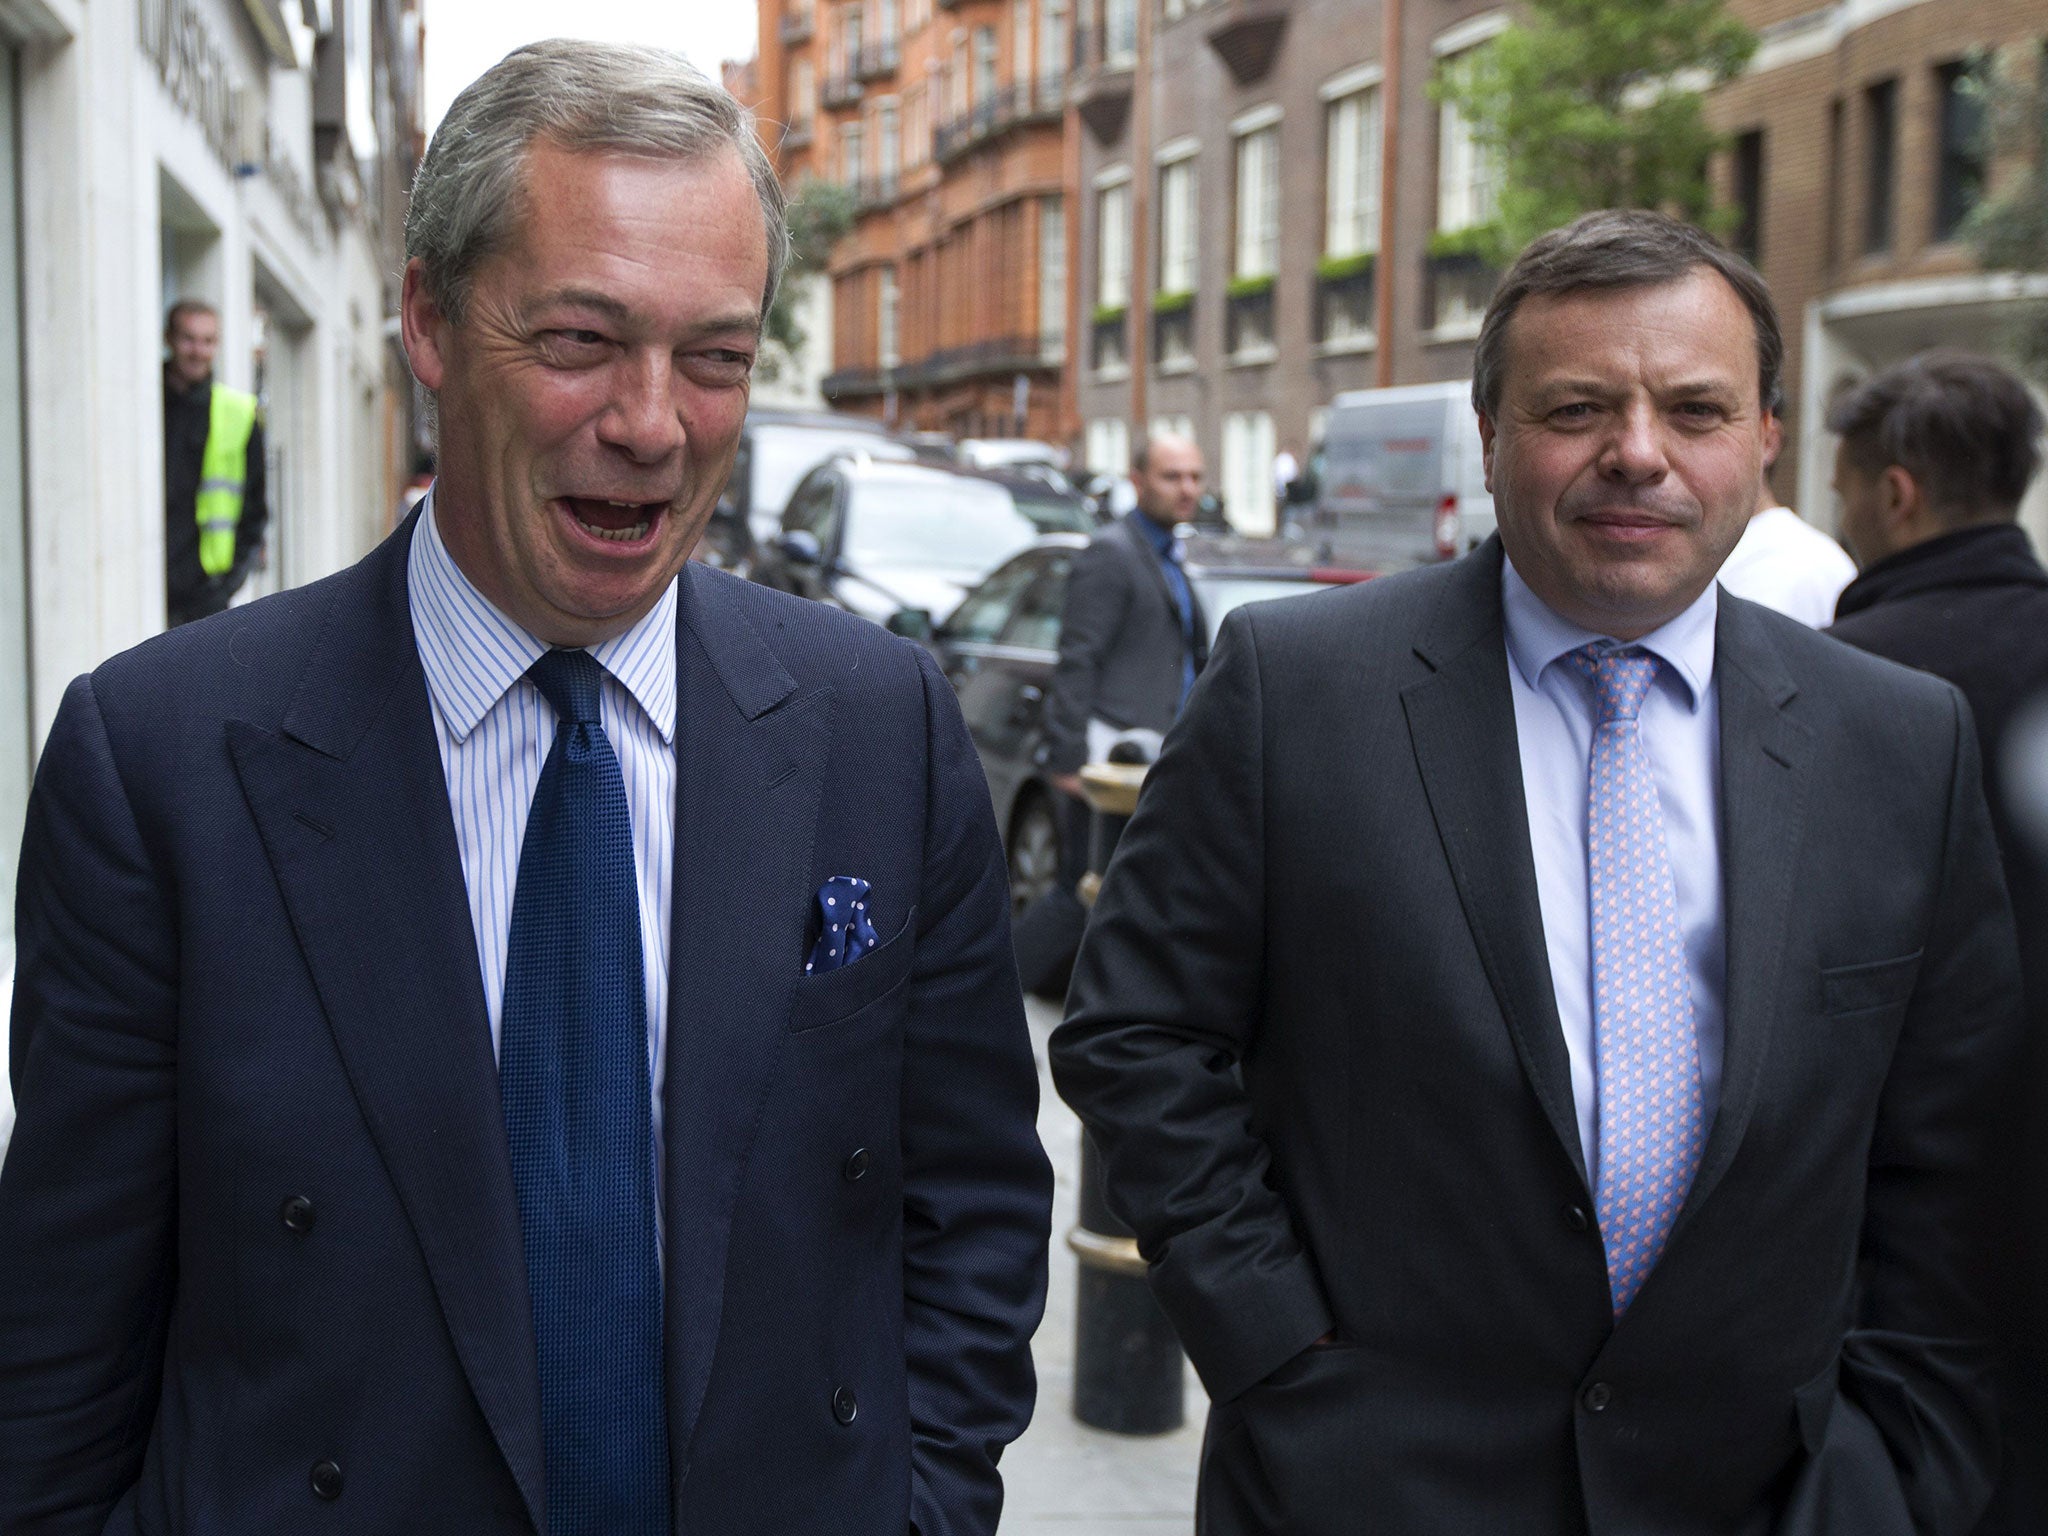 Major Ukip donor Arron Banks (right), with former party leader Nigel farage